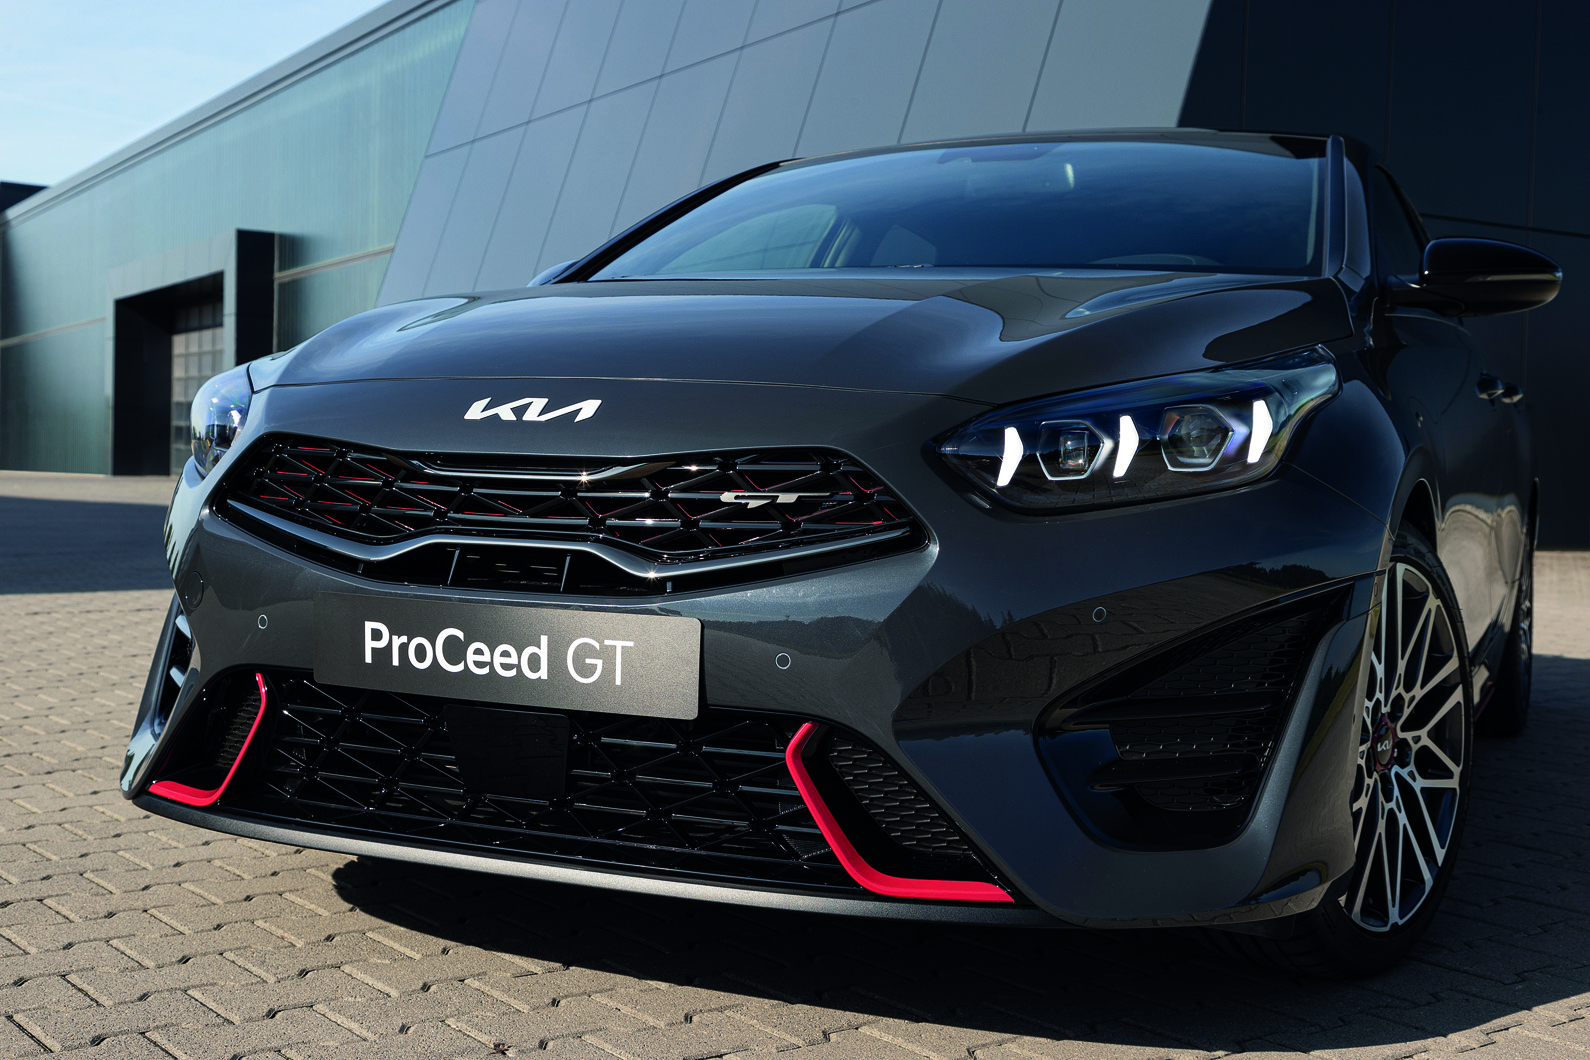 Kia Ceed Lineup Reshuffled And Upgraded For 2021, Gets New 156 HP